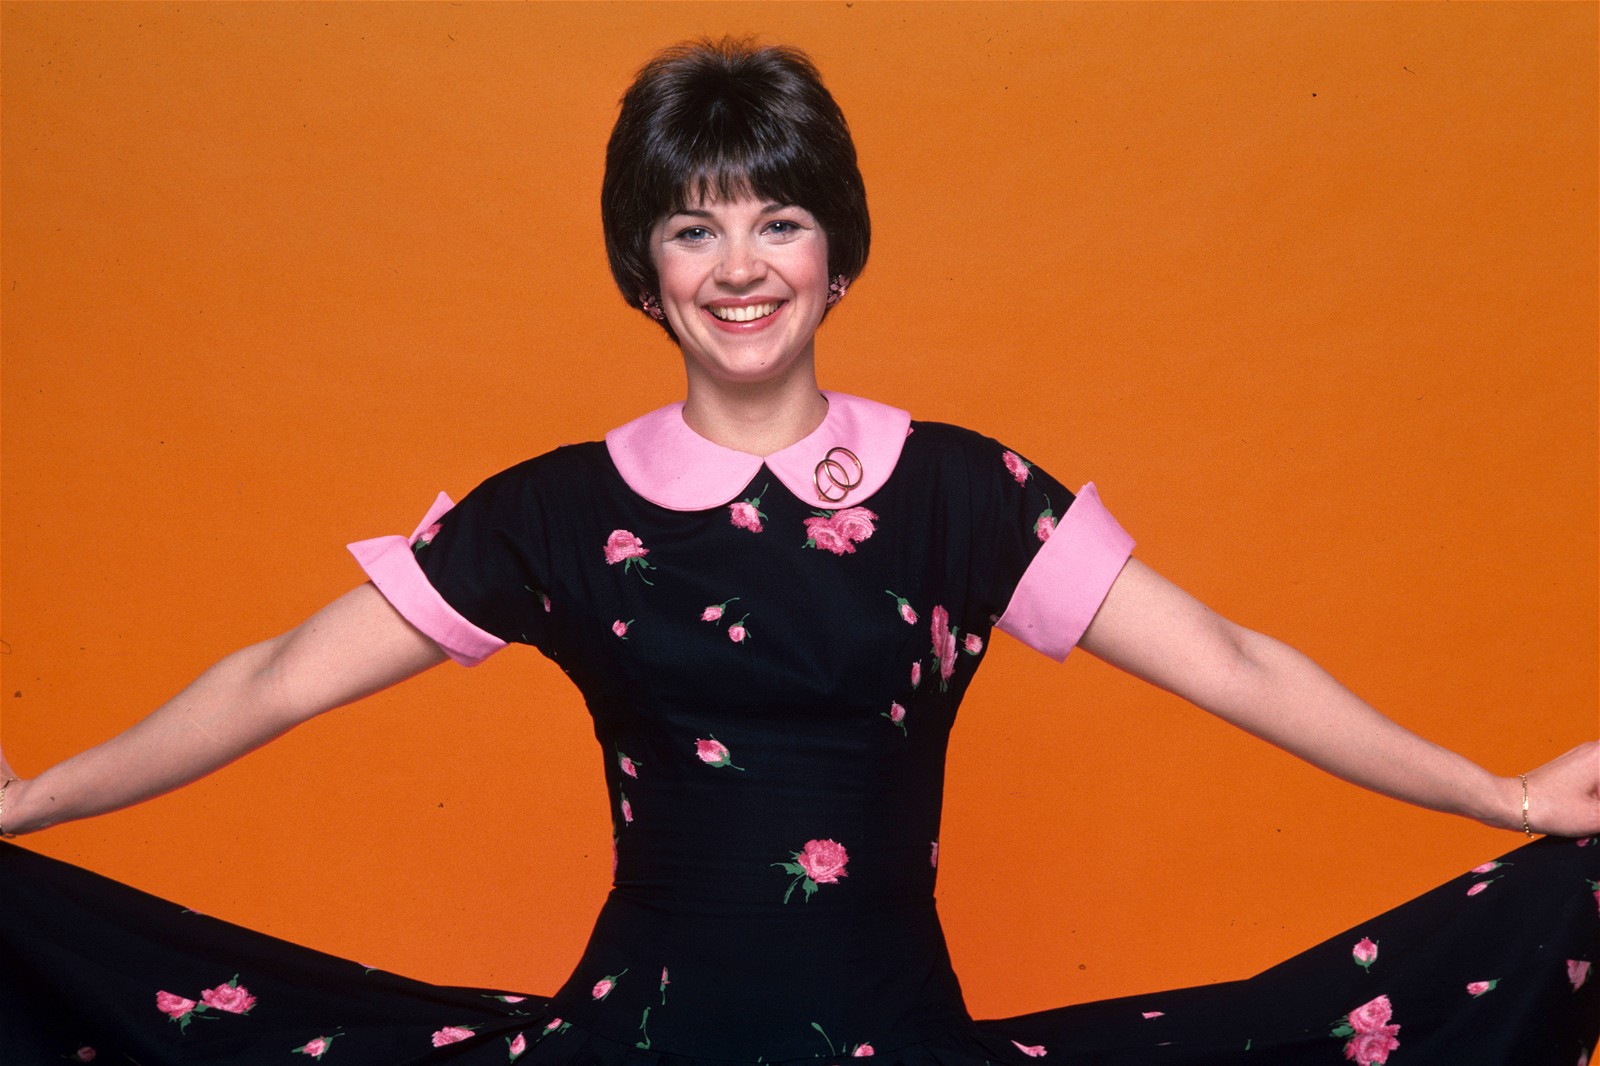 Cindy Williams played the lovable Shirley in Happy Days and Laverne and Shirley